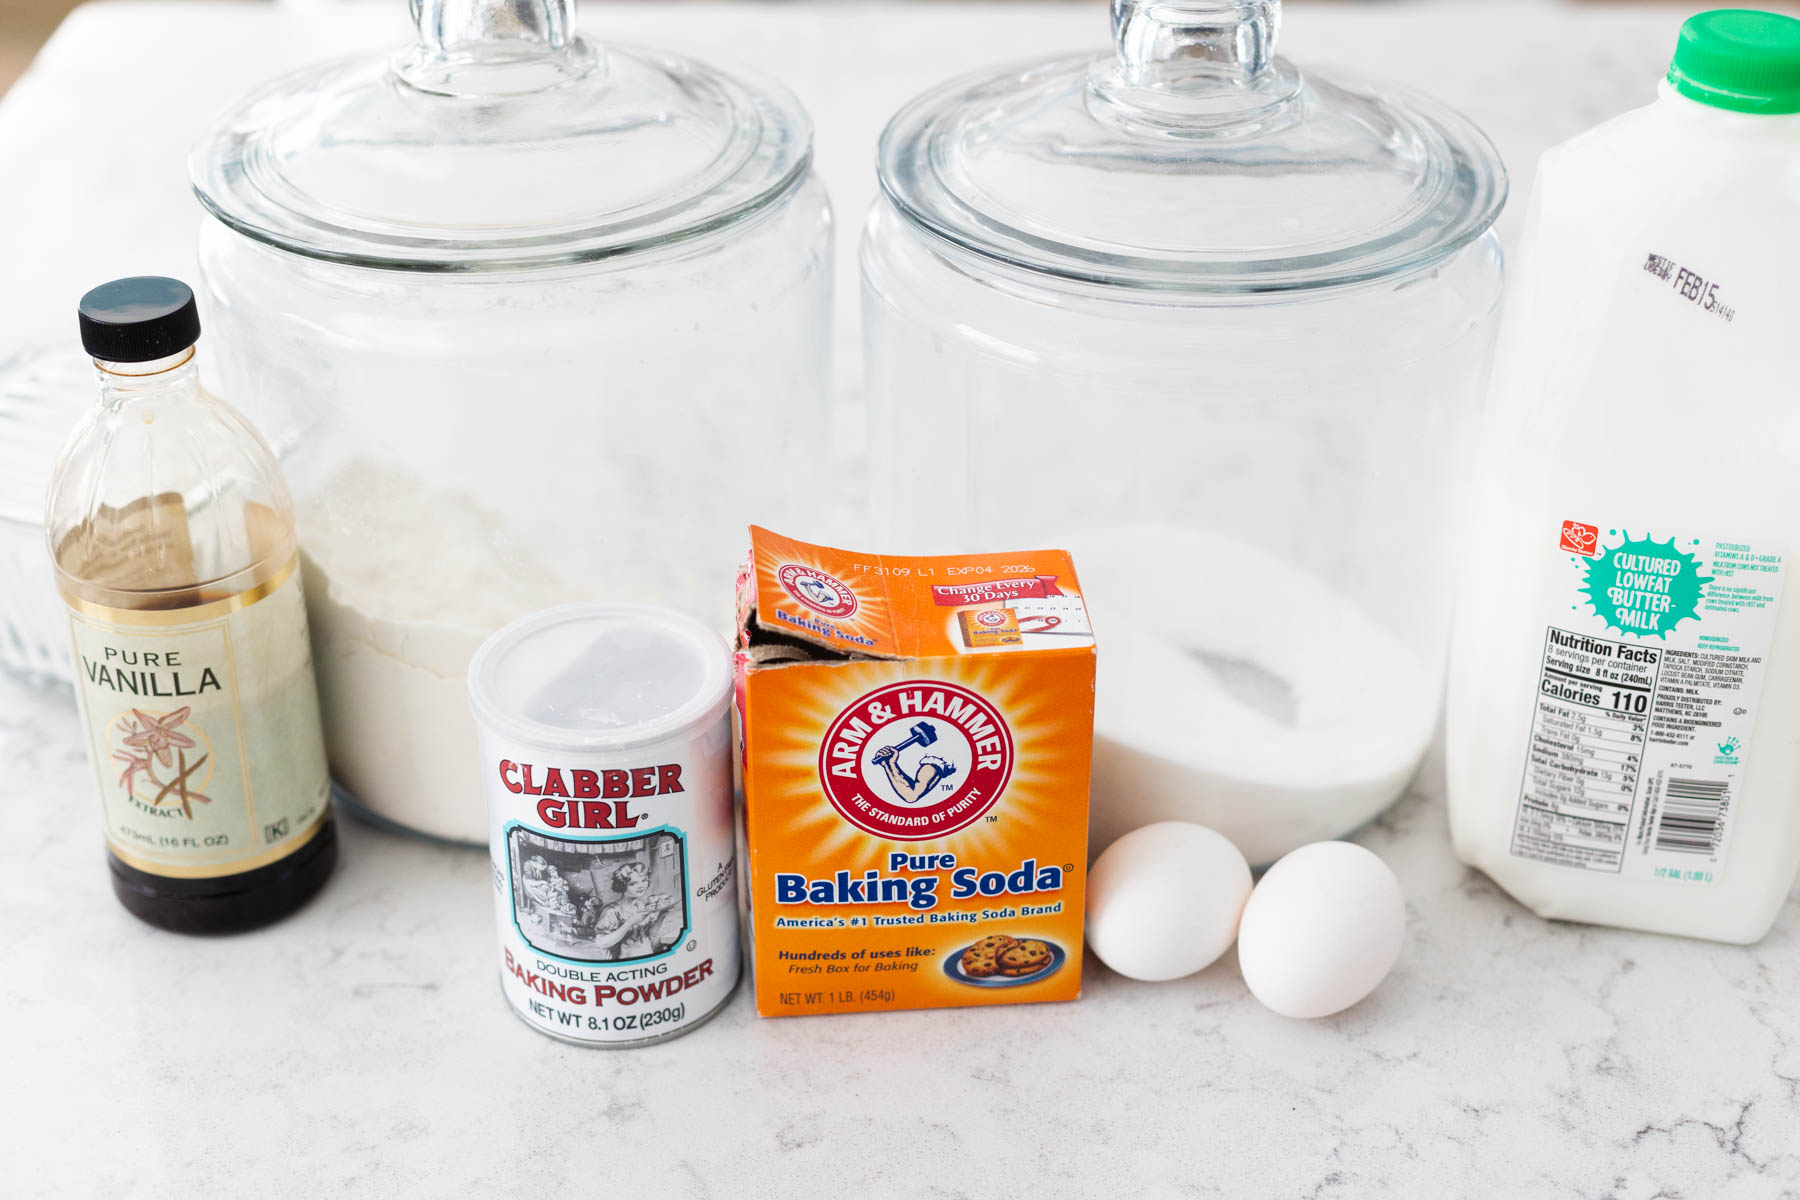 The ingredients to make homemade buttermilk pancakes are on the counter.